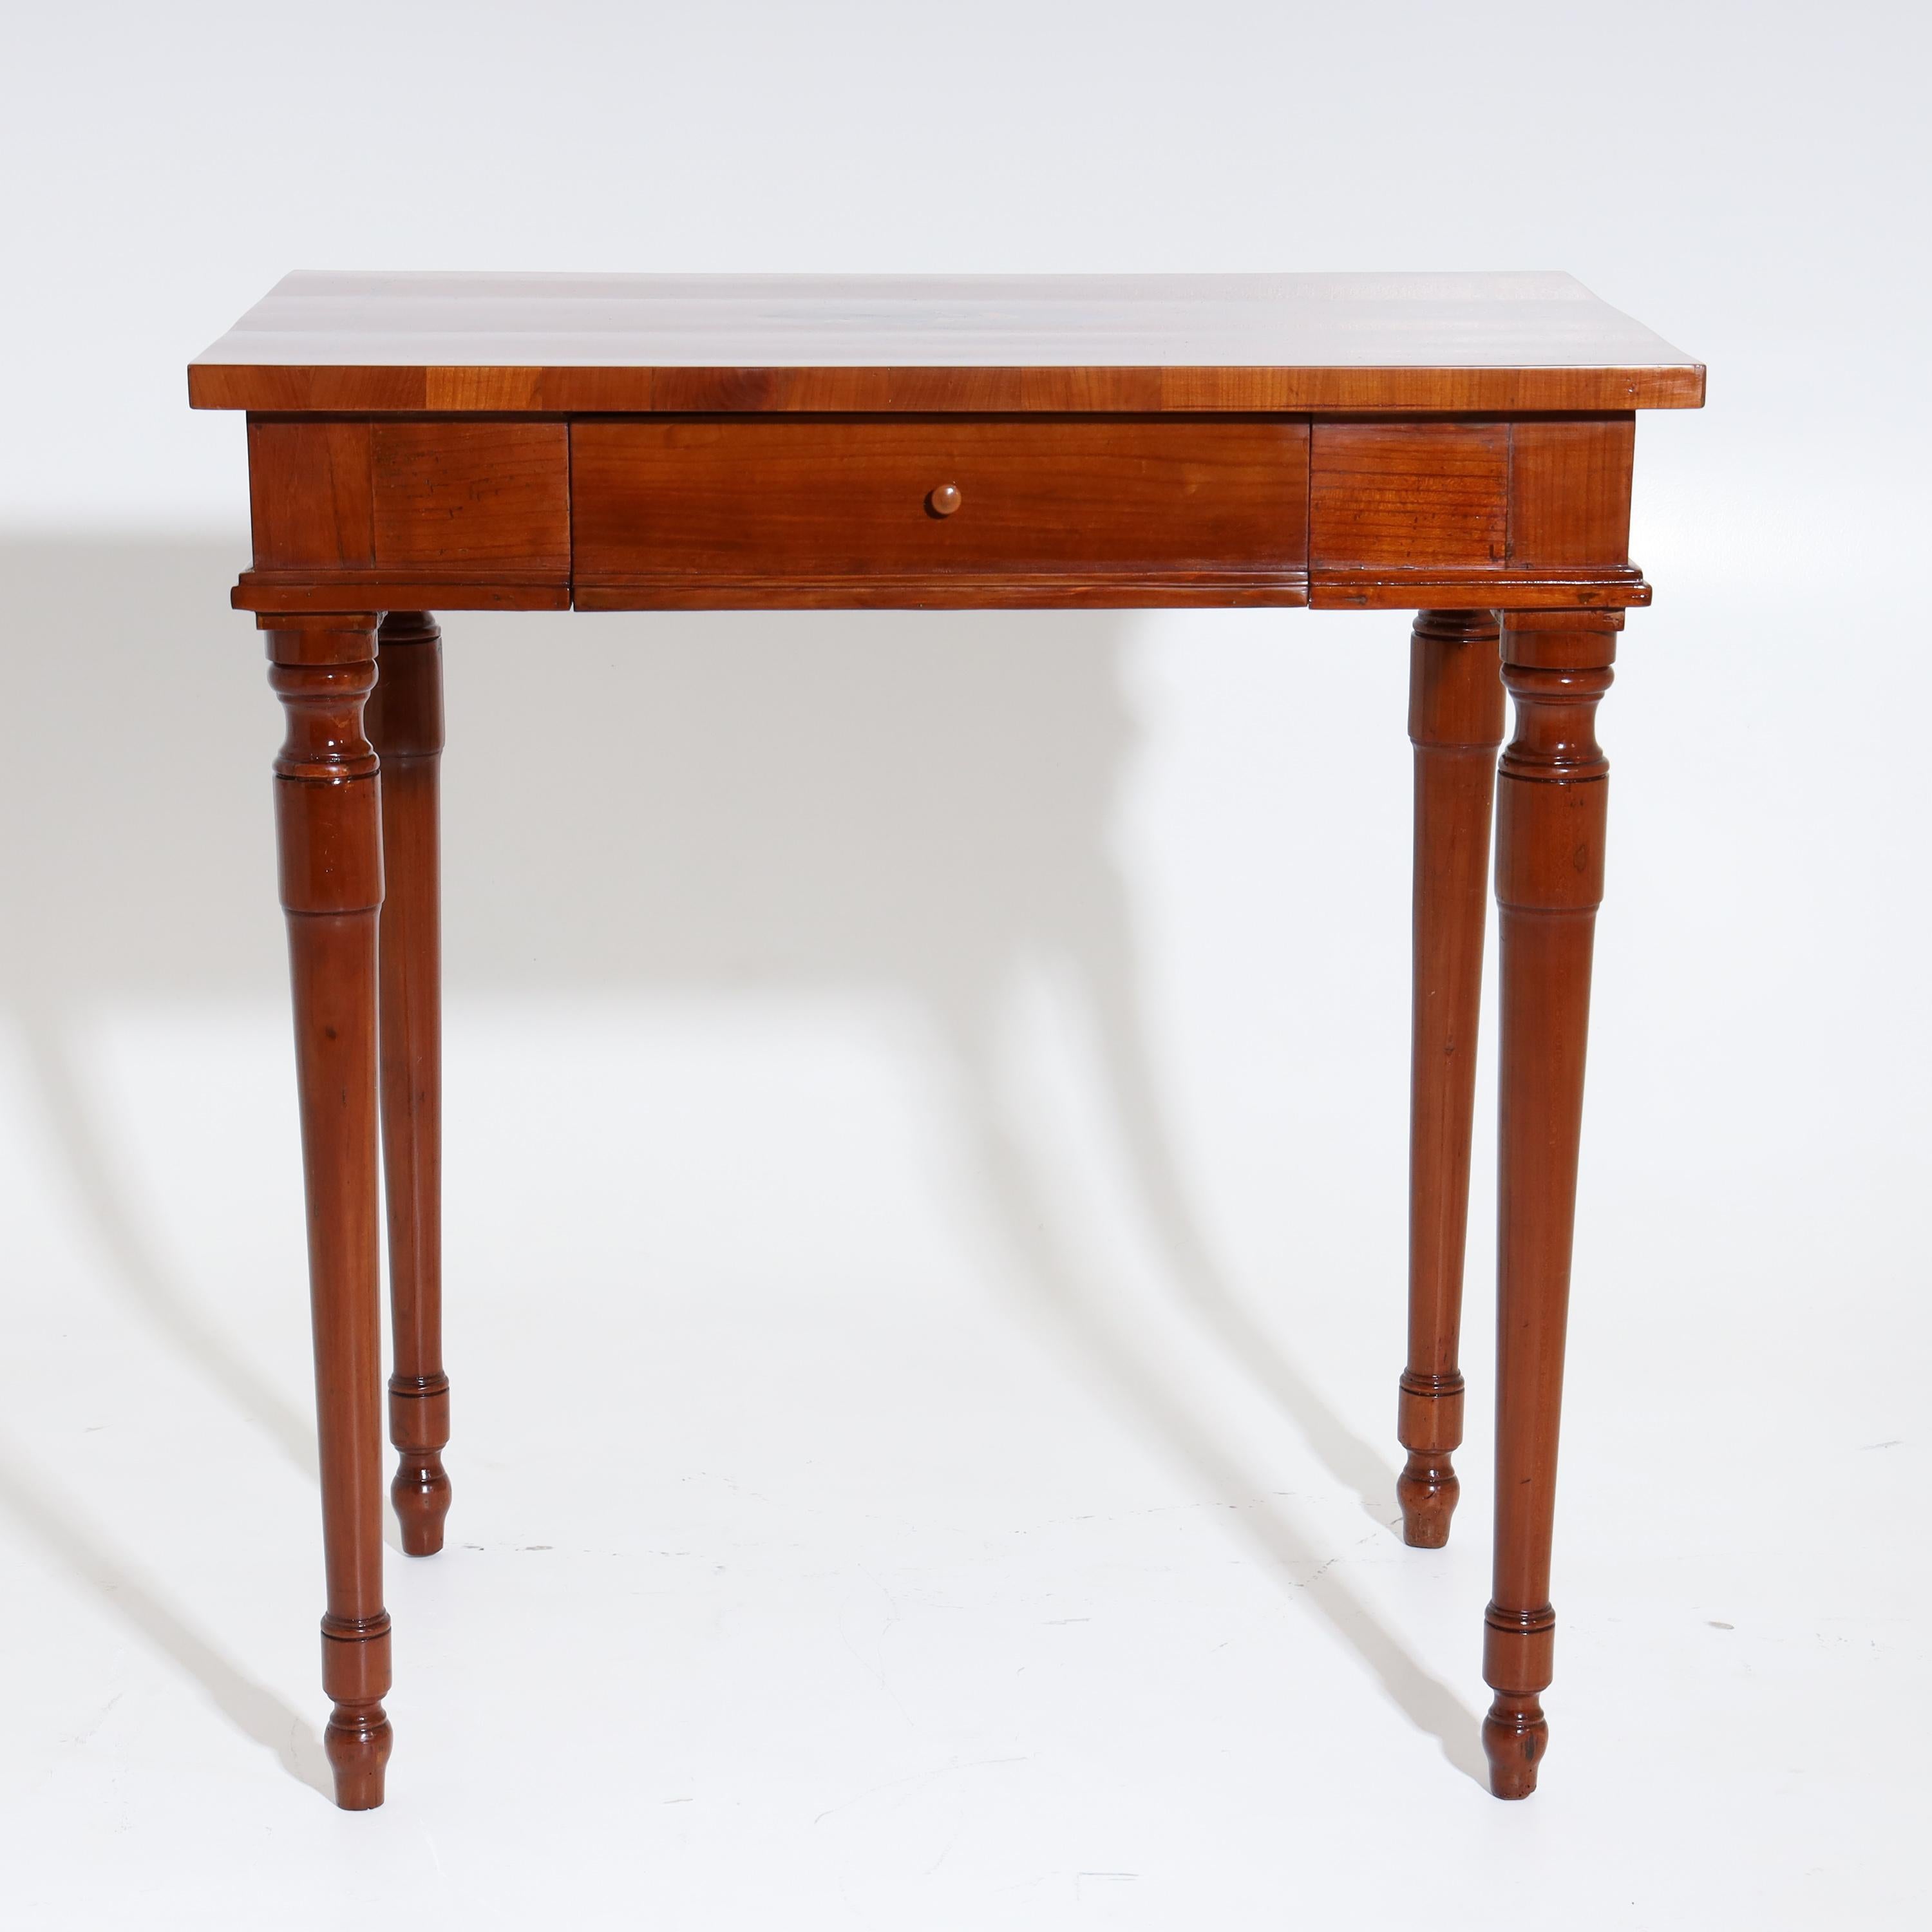 Side table made of cherry, standing on conical and balustered pointed legs, with straight frame and one drawer. The slightly protruding tabletop is decorated with a medallion-shaped inlay with putto and bird.